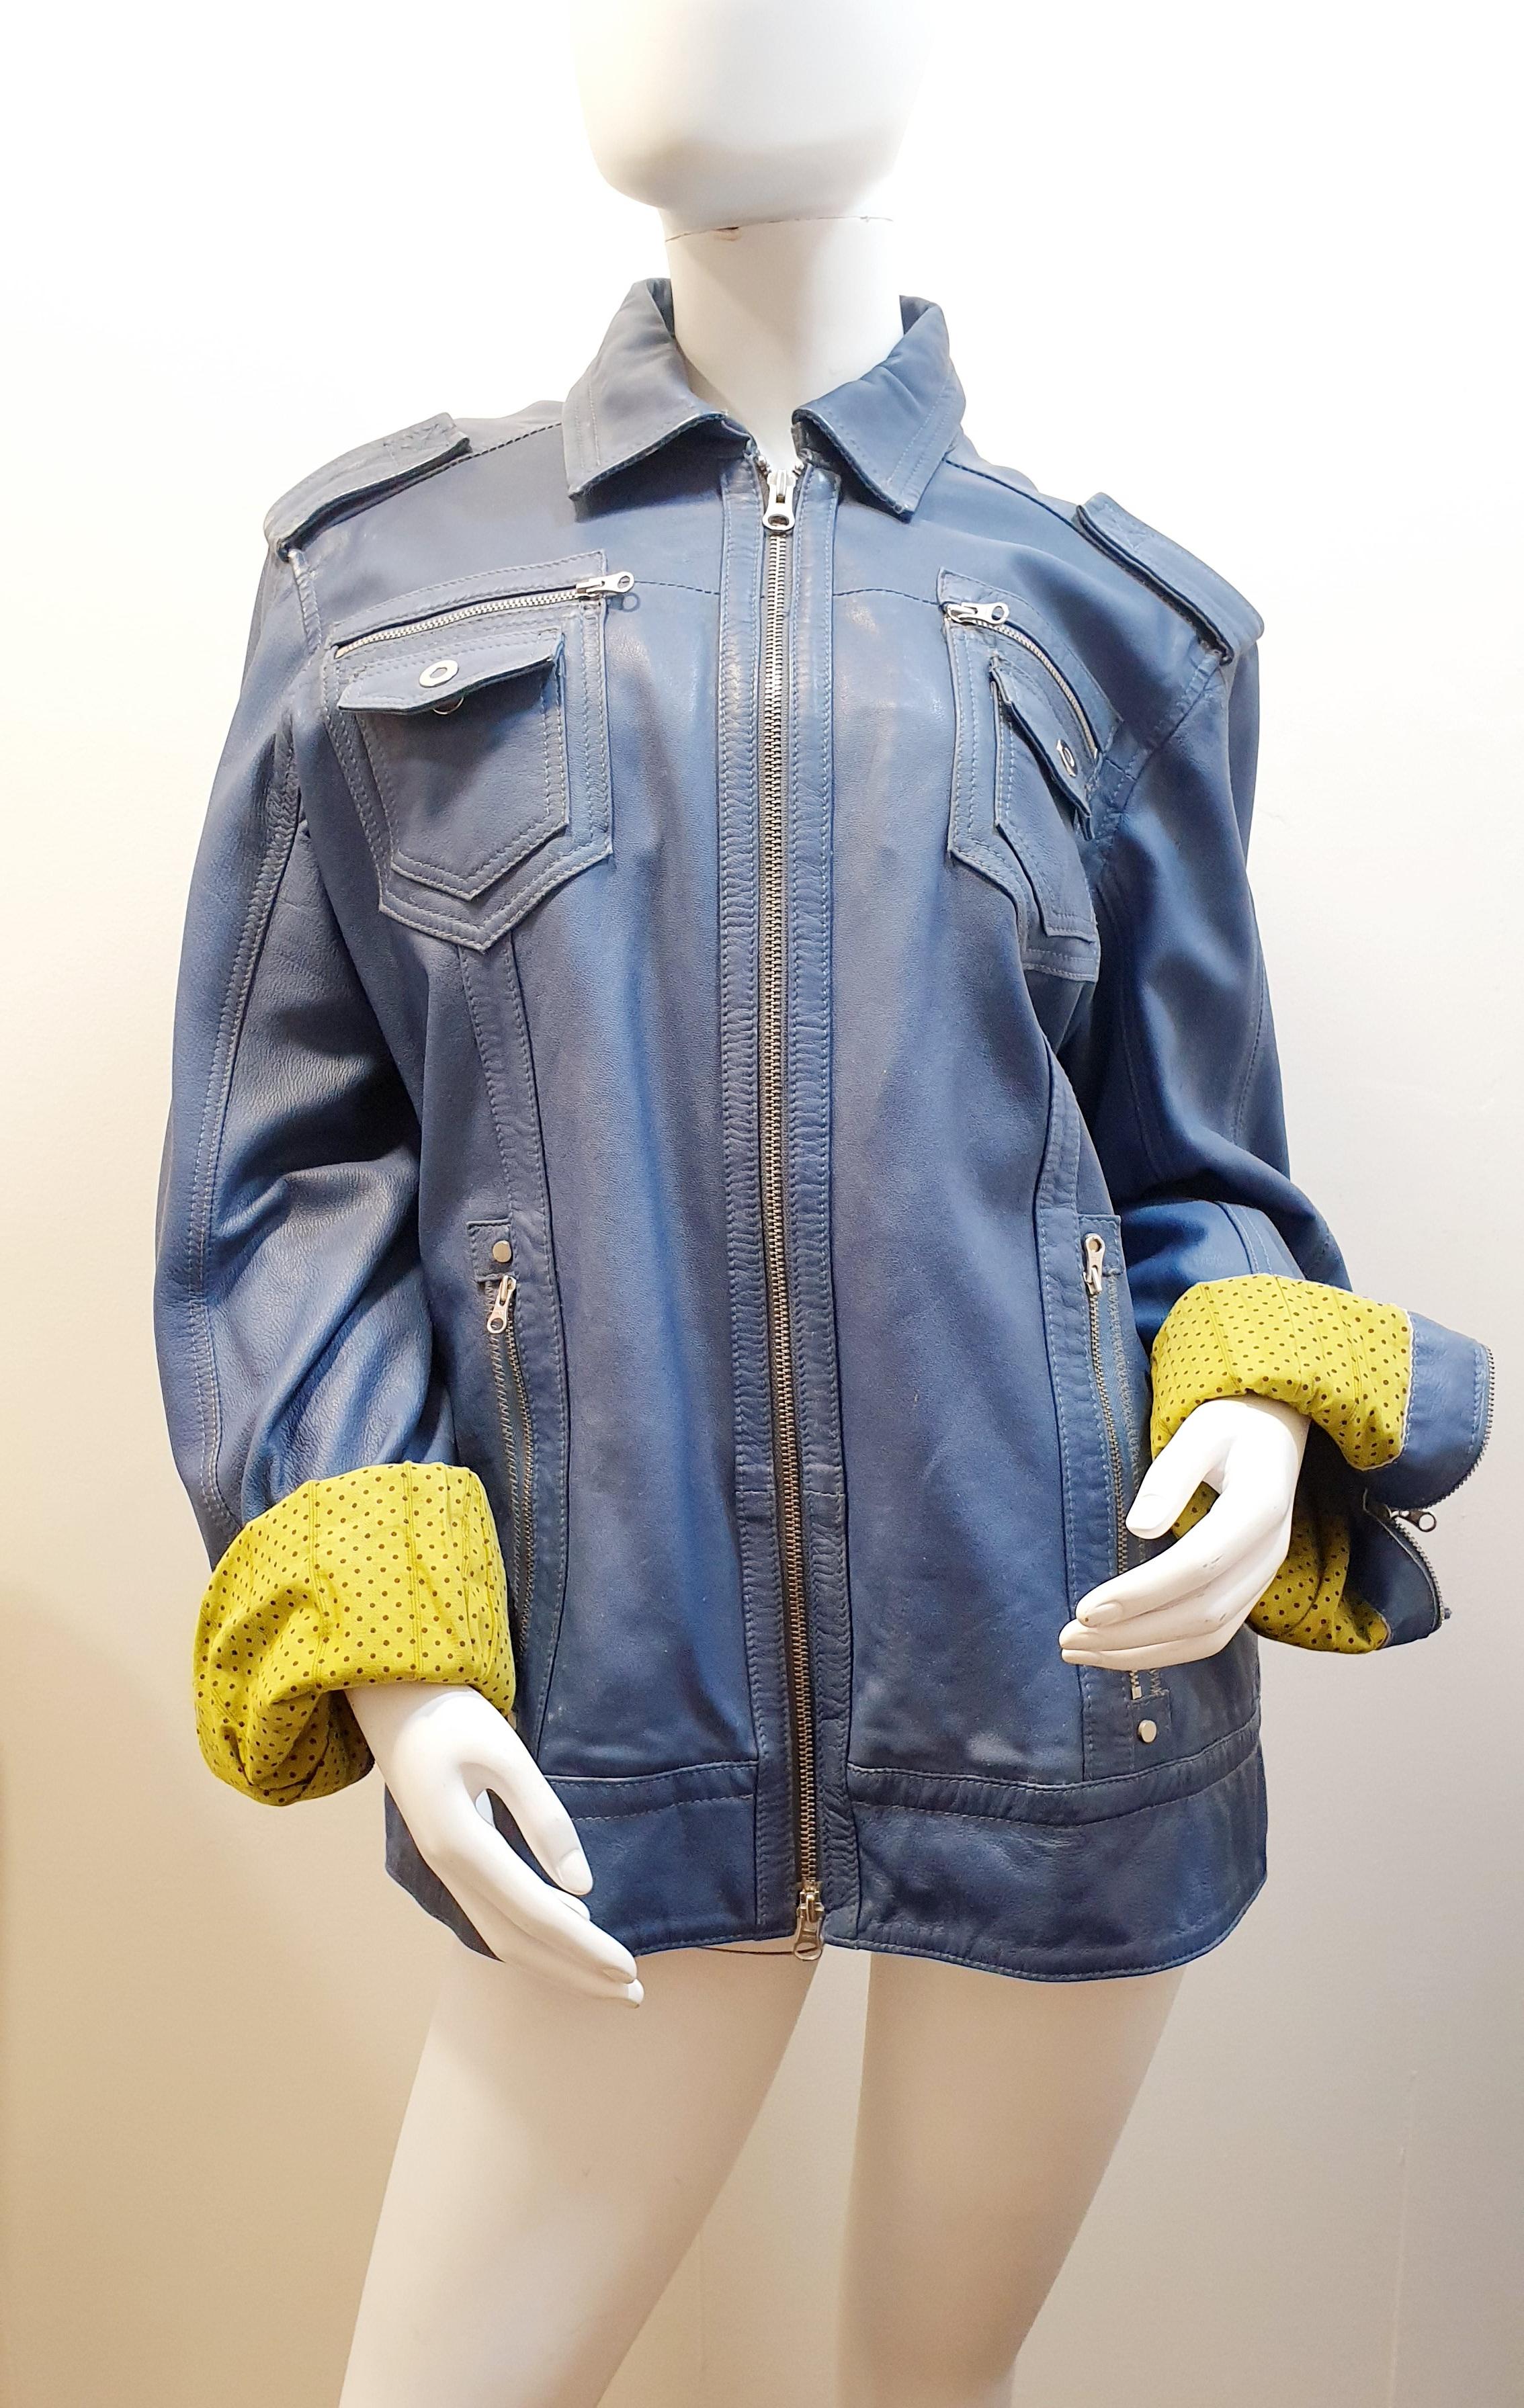 Smith & Smith Blue Leather Jacket
The front closure is a zipper
It has four front pockets and three inside.
The length from the shoulder is 75 cm ( 29,52 inches )
The sleeve length is 70 cm (27,55 inches )

Our Company Fashion Division is